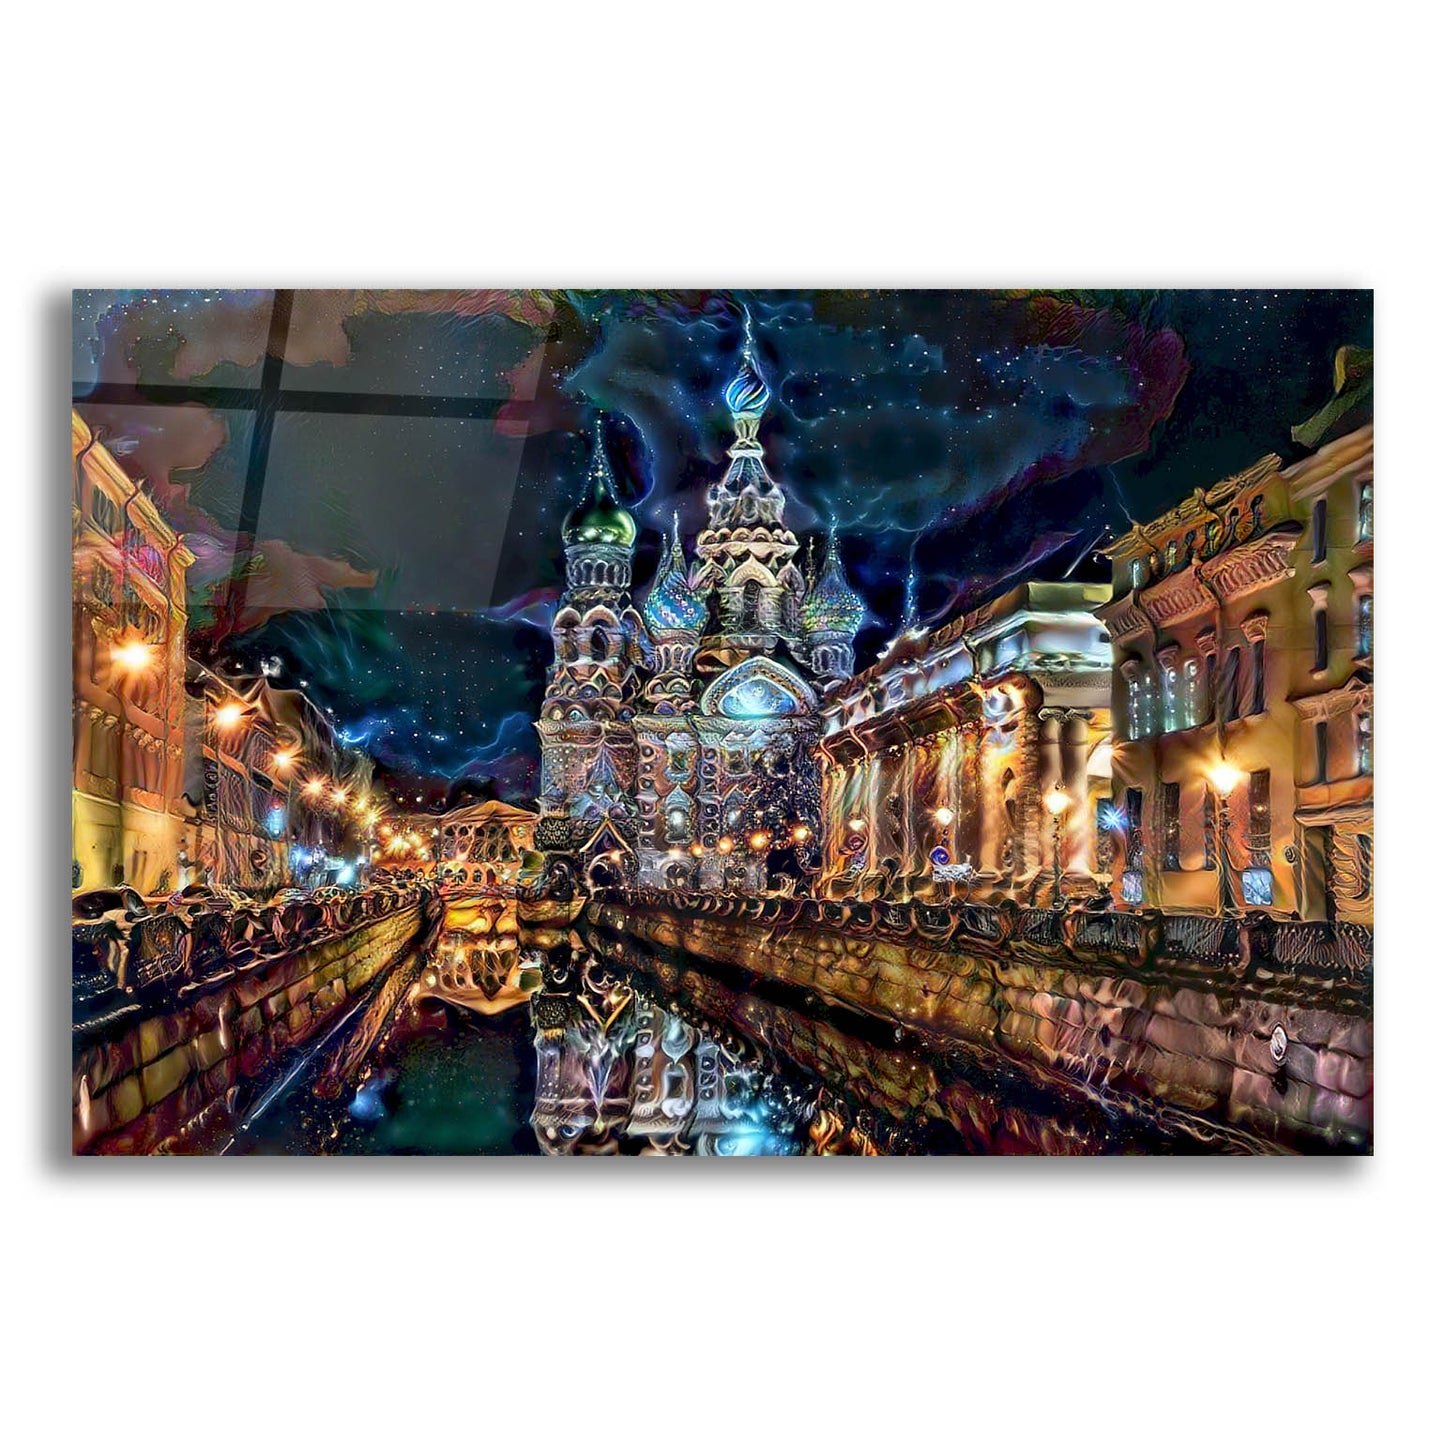 Epic Art 'Saint Petersburg Russia Church of the Savior on Spilled Blood at night' by Pedro Gavidia, Acrylic Glass Wall Art,16x12